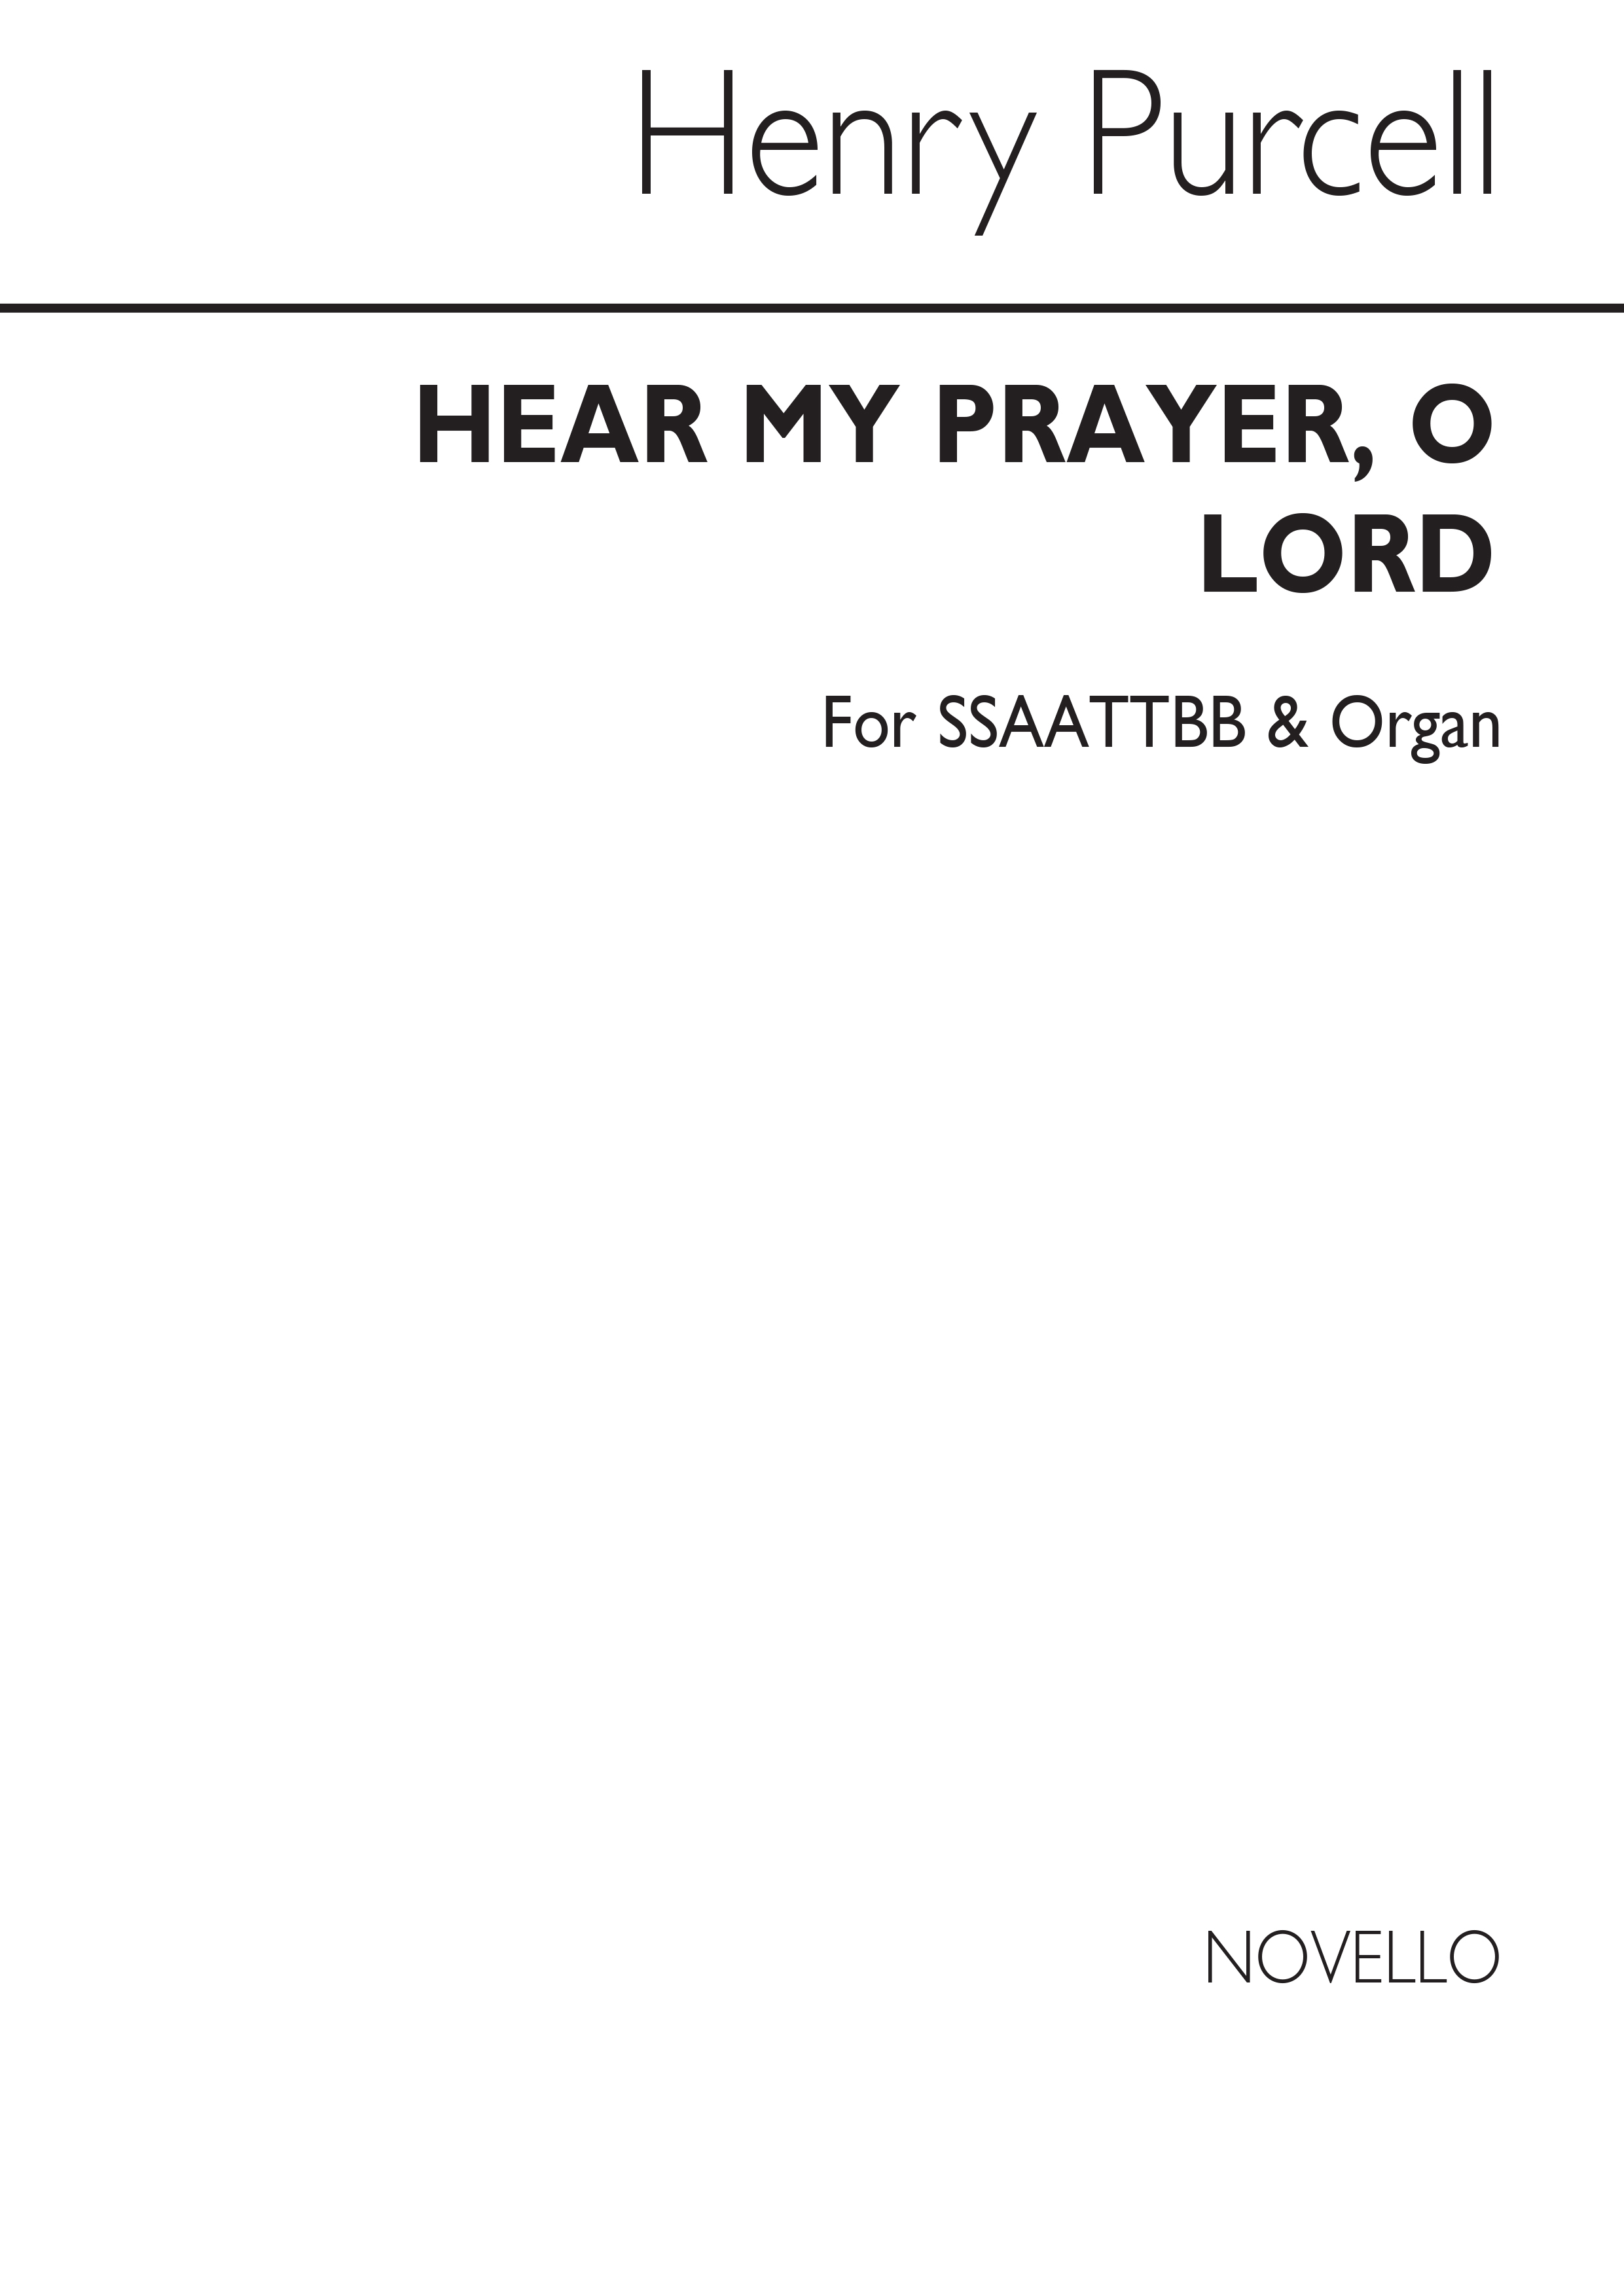 Henry Purcell: Hear My Prayer, O Lord (SSAATTBB)